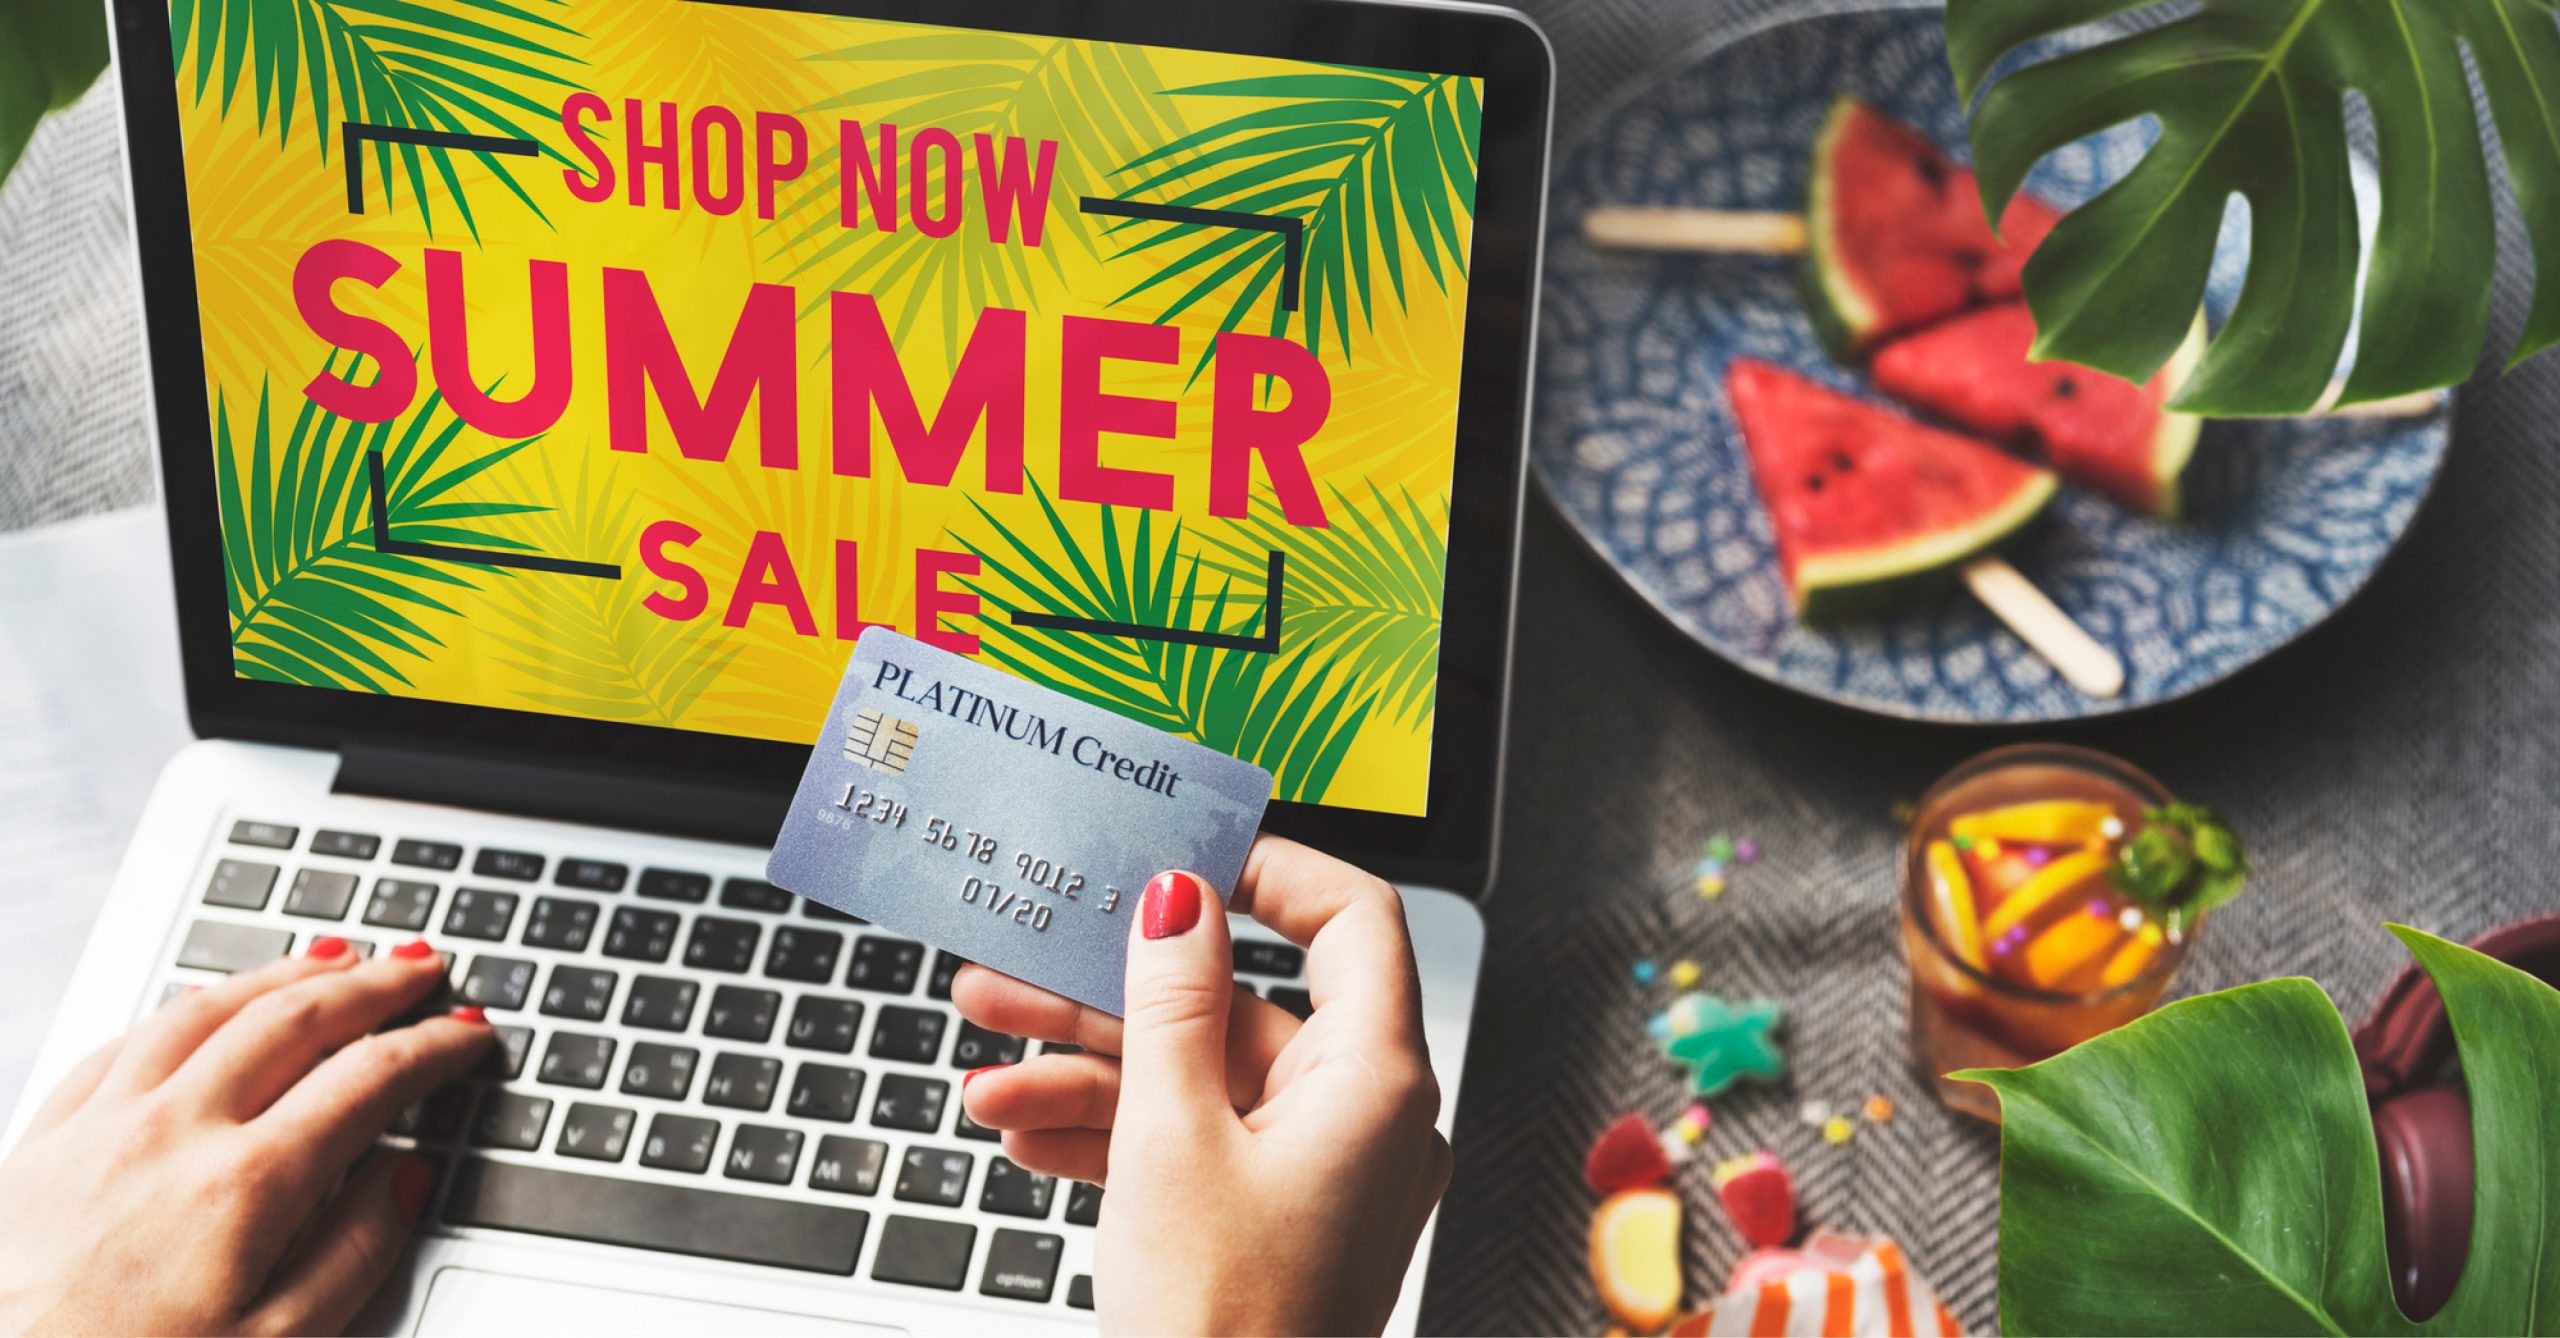 Celebrate The Start Of Summer With A Sweet New Sale